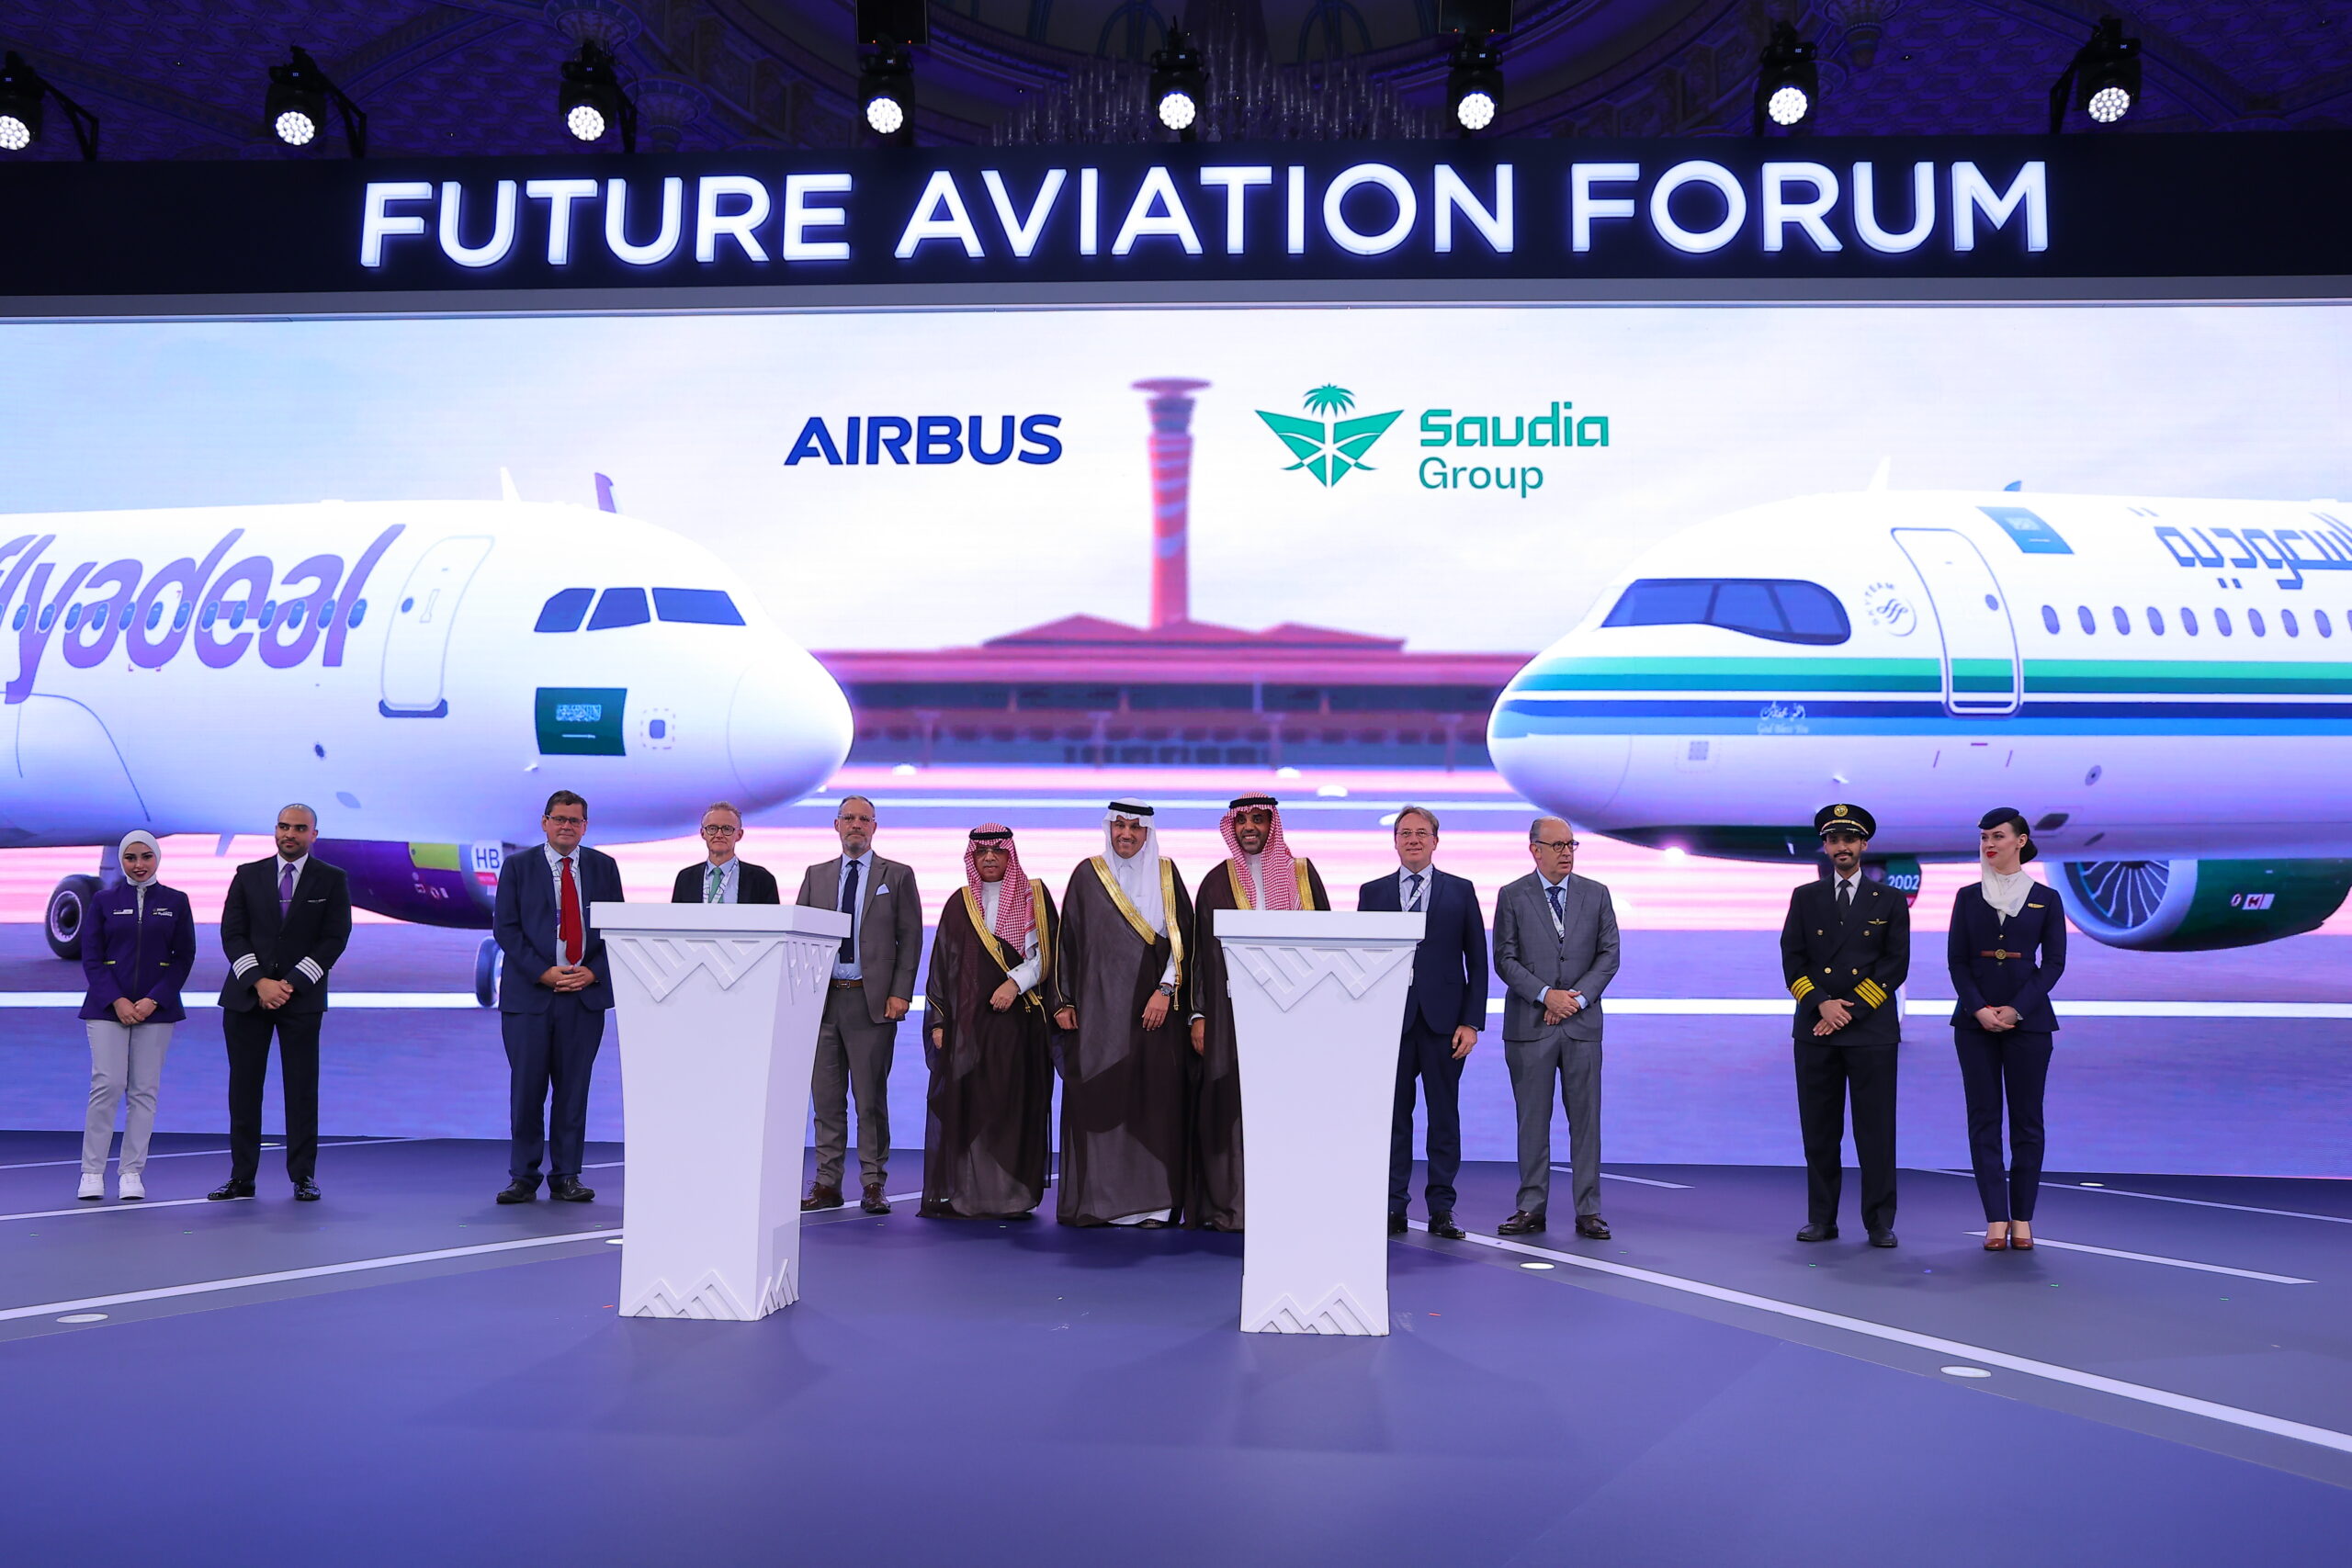 Saudia Group signs largest aviation deal for the Kingdom with Airbus